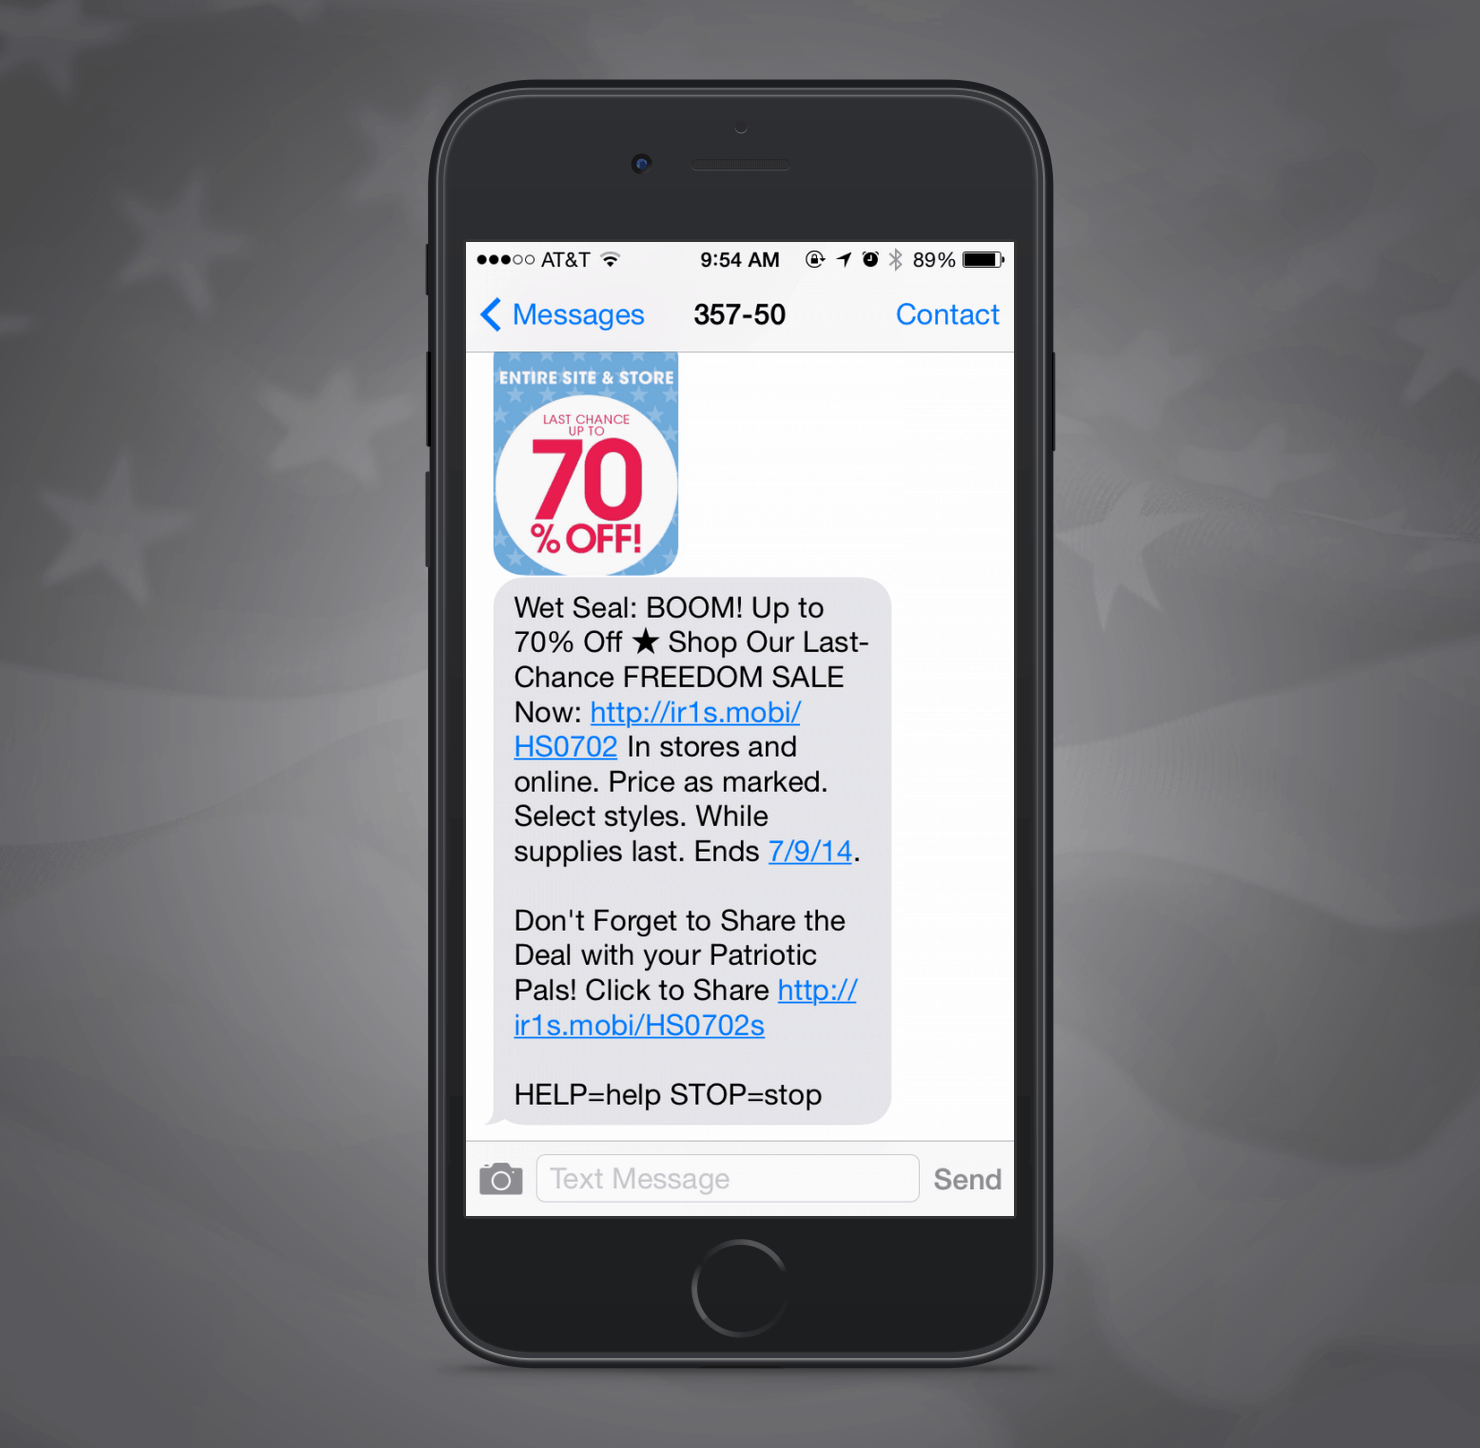 Wet Seal SMS Promotion Example from Independence Day